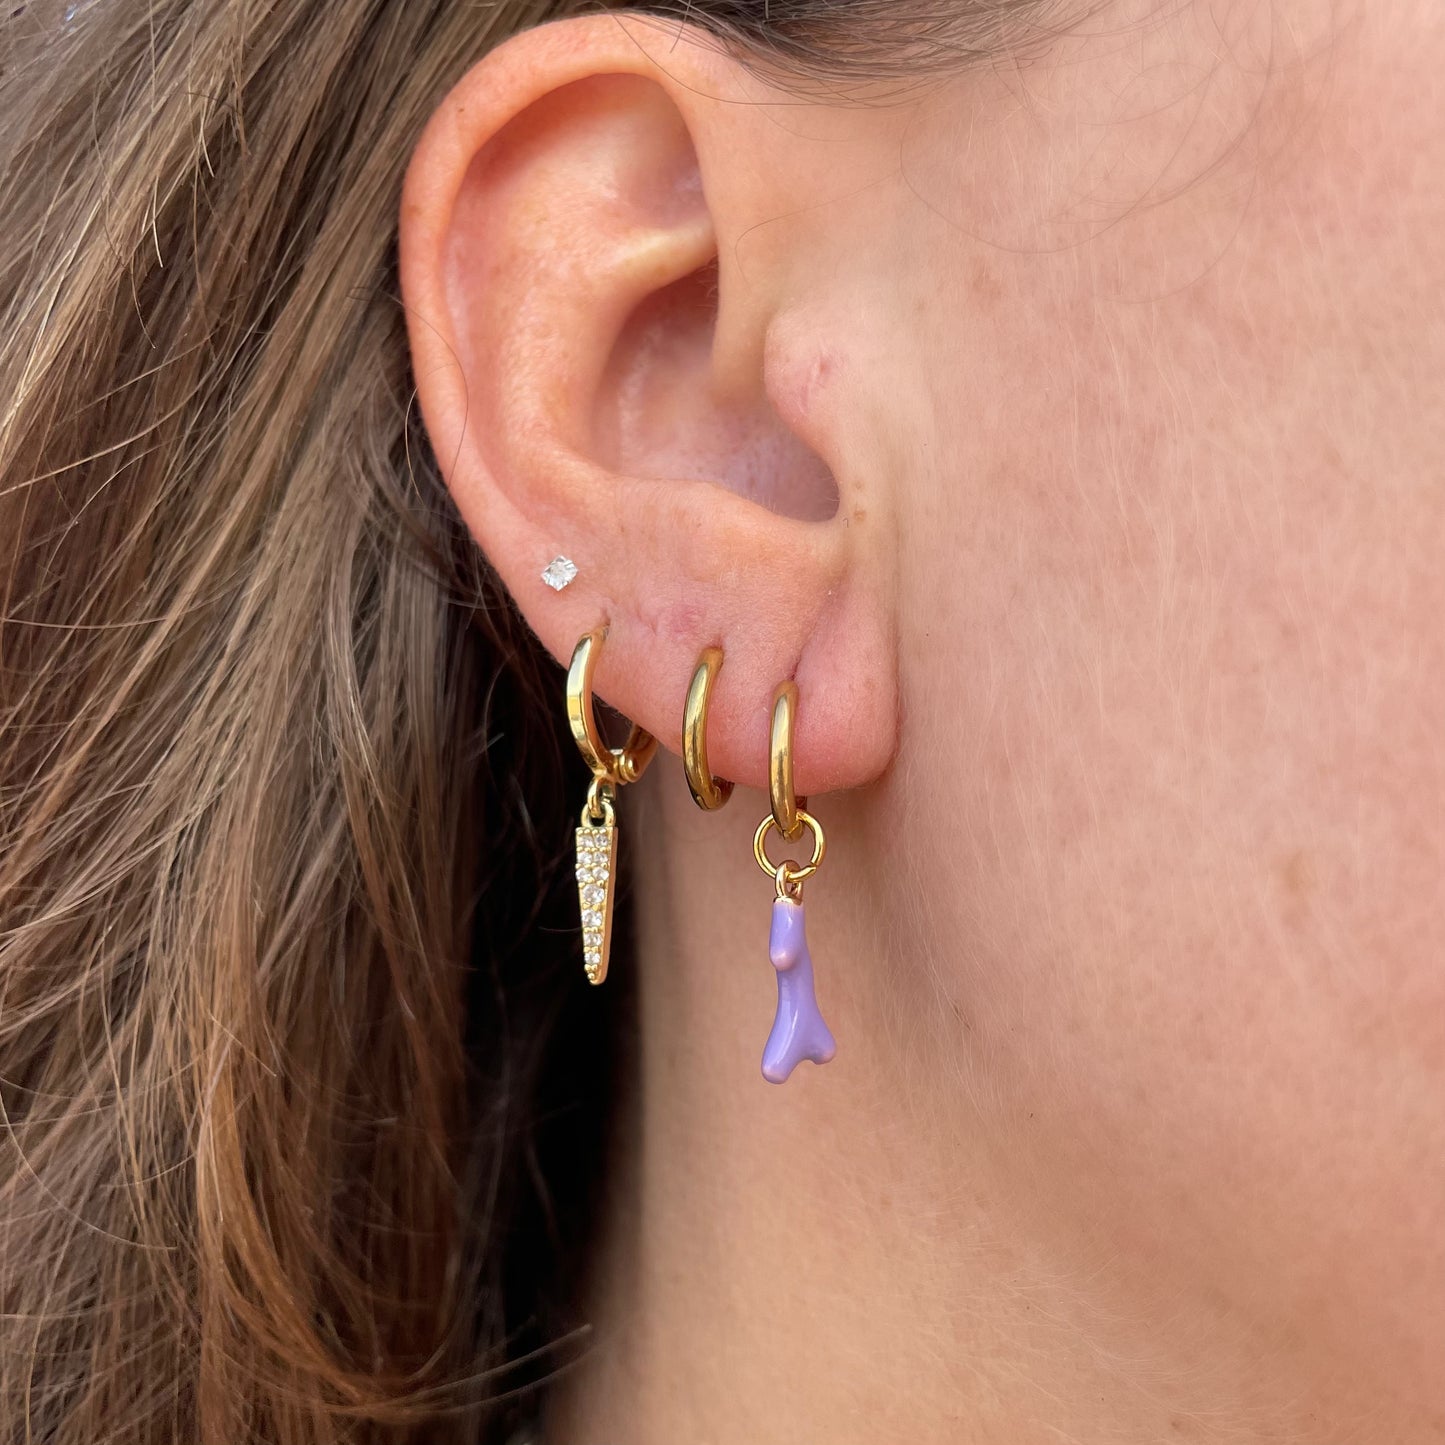 Tiny Purple coral Hoops